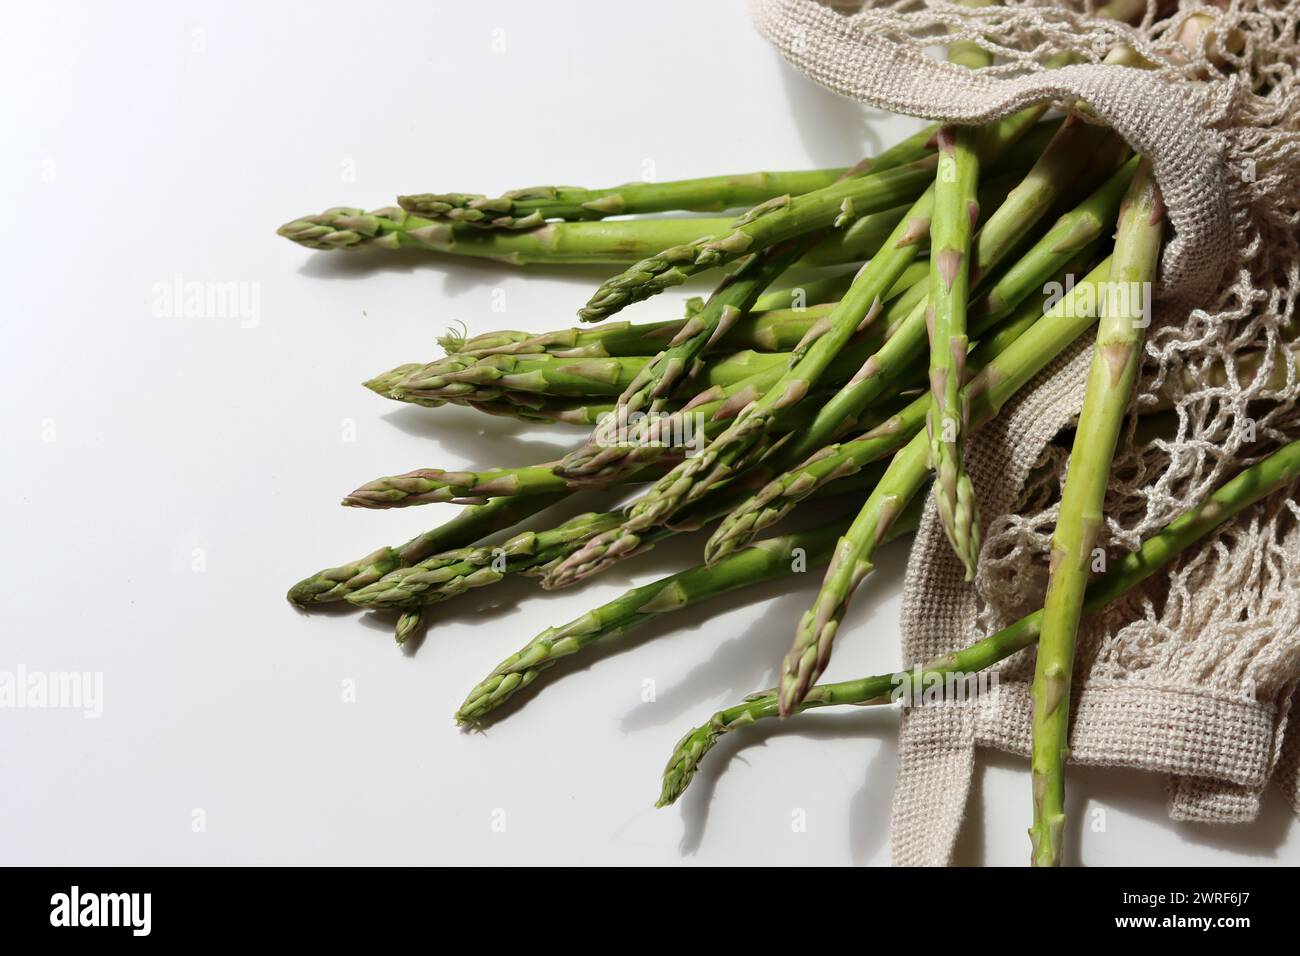 Bunch of fresh green asparagus close up  photo. Raw asparagus top view. Healthy eating concept. Natural vitamins and antioxidants. Stock Photo